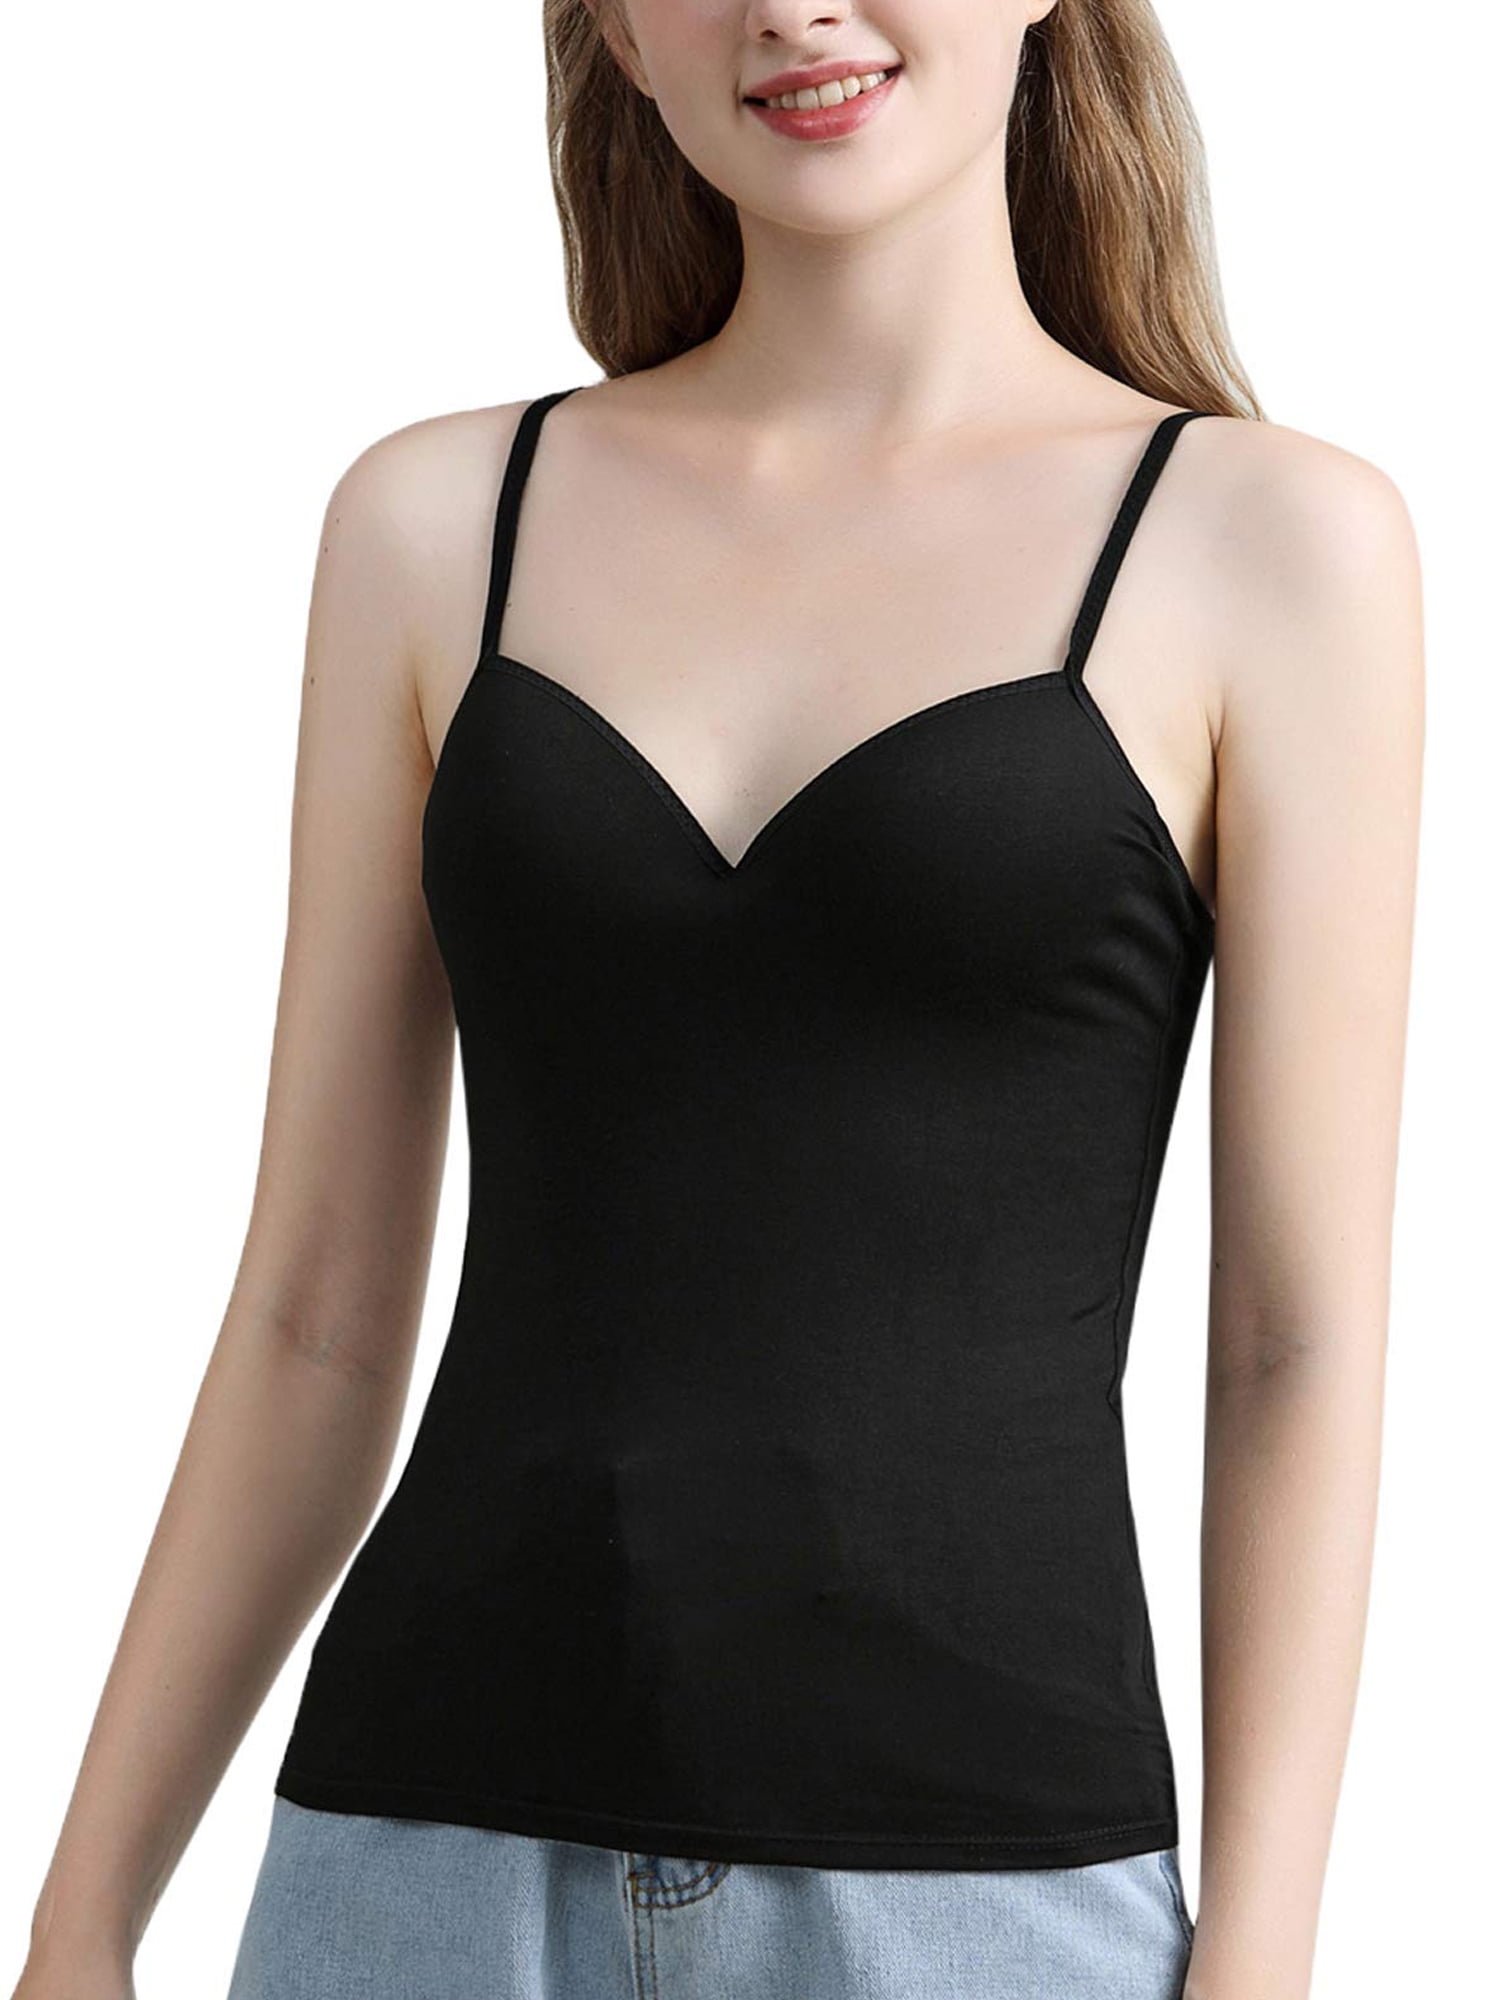 Youth Removable Satin Adjustable Elastic Tank Top Straps in Black